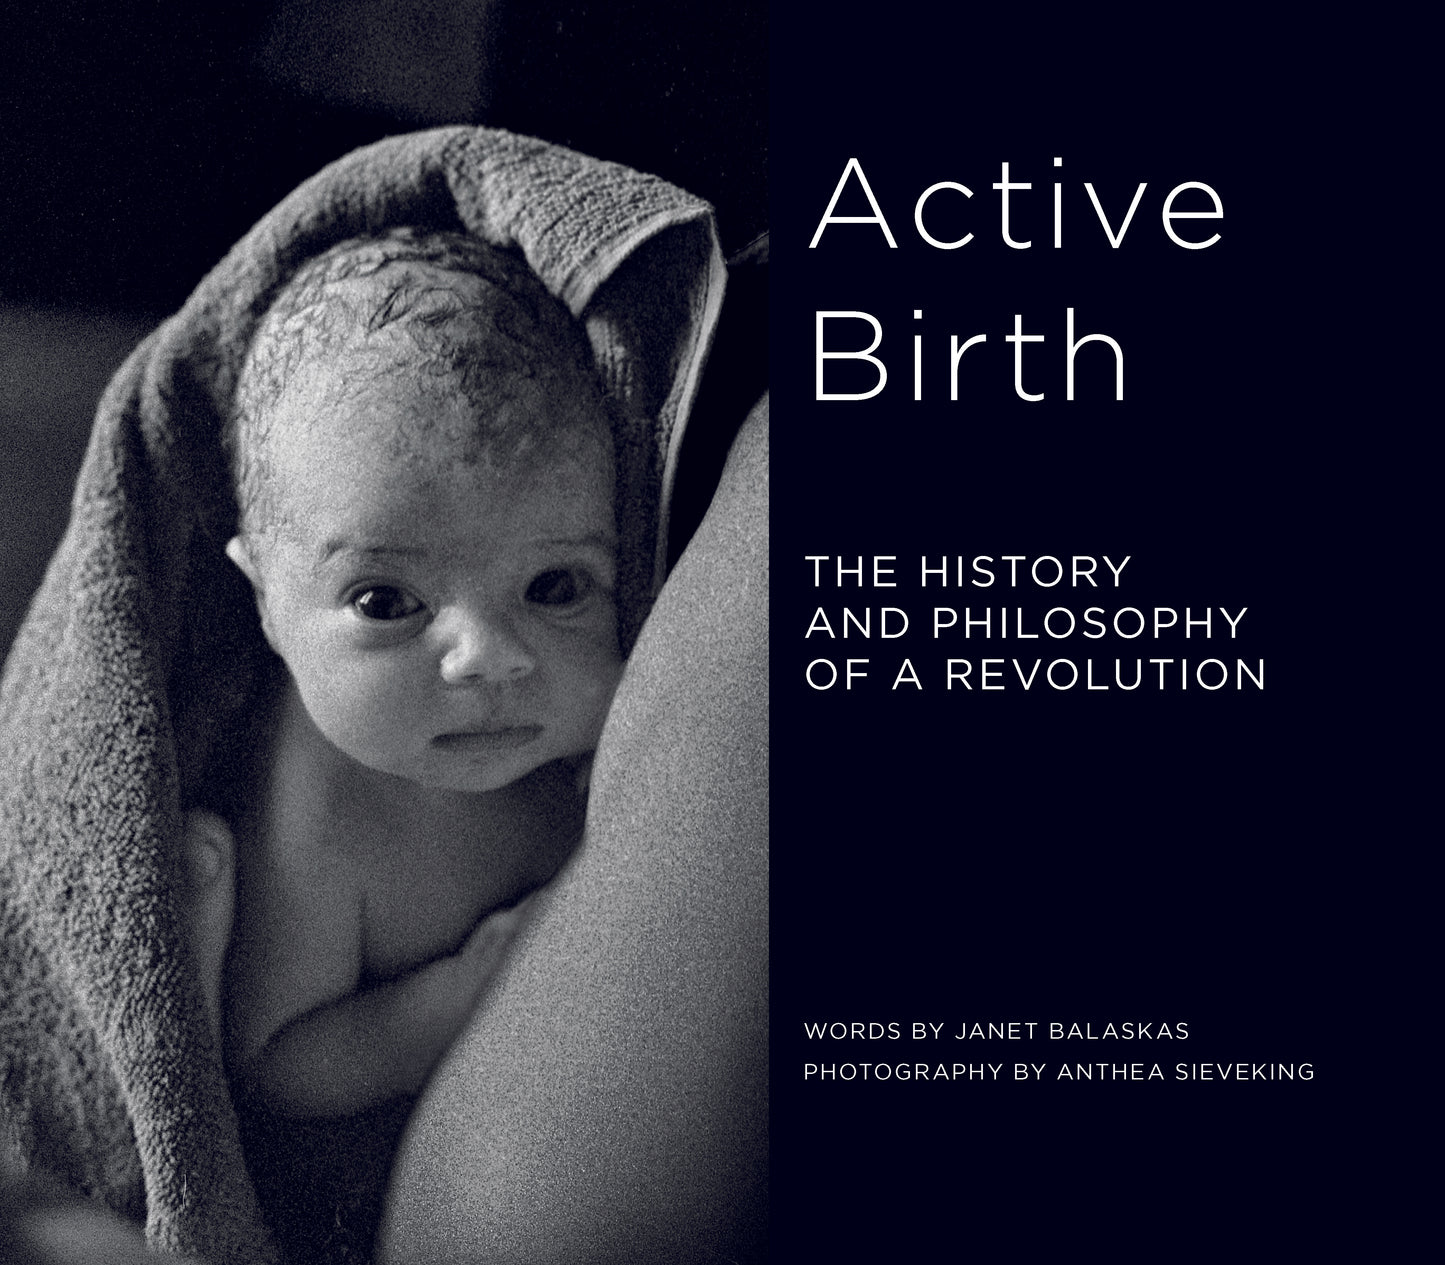 Active Birth: The history and philosophy of a revolution